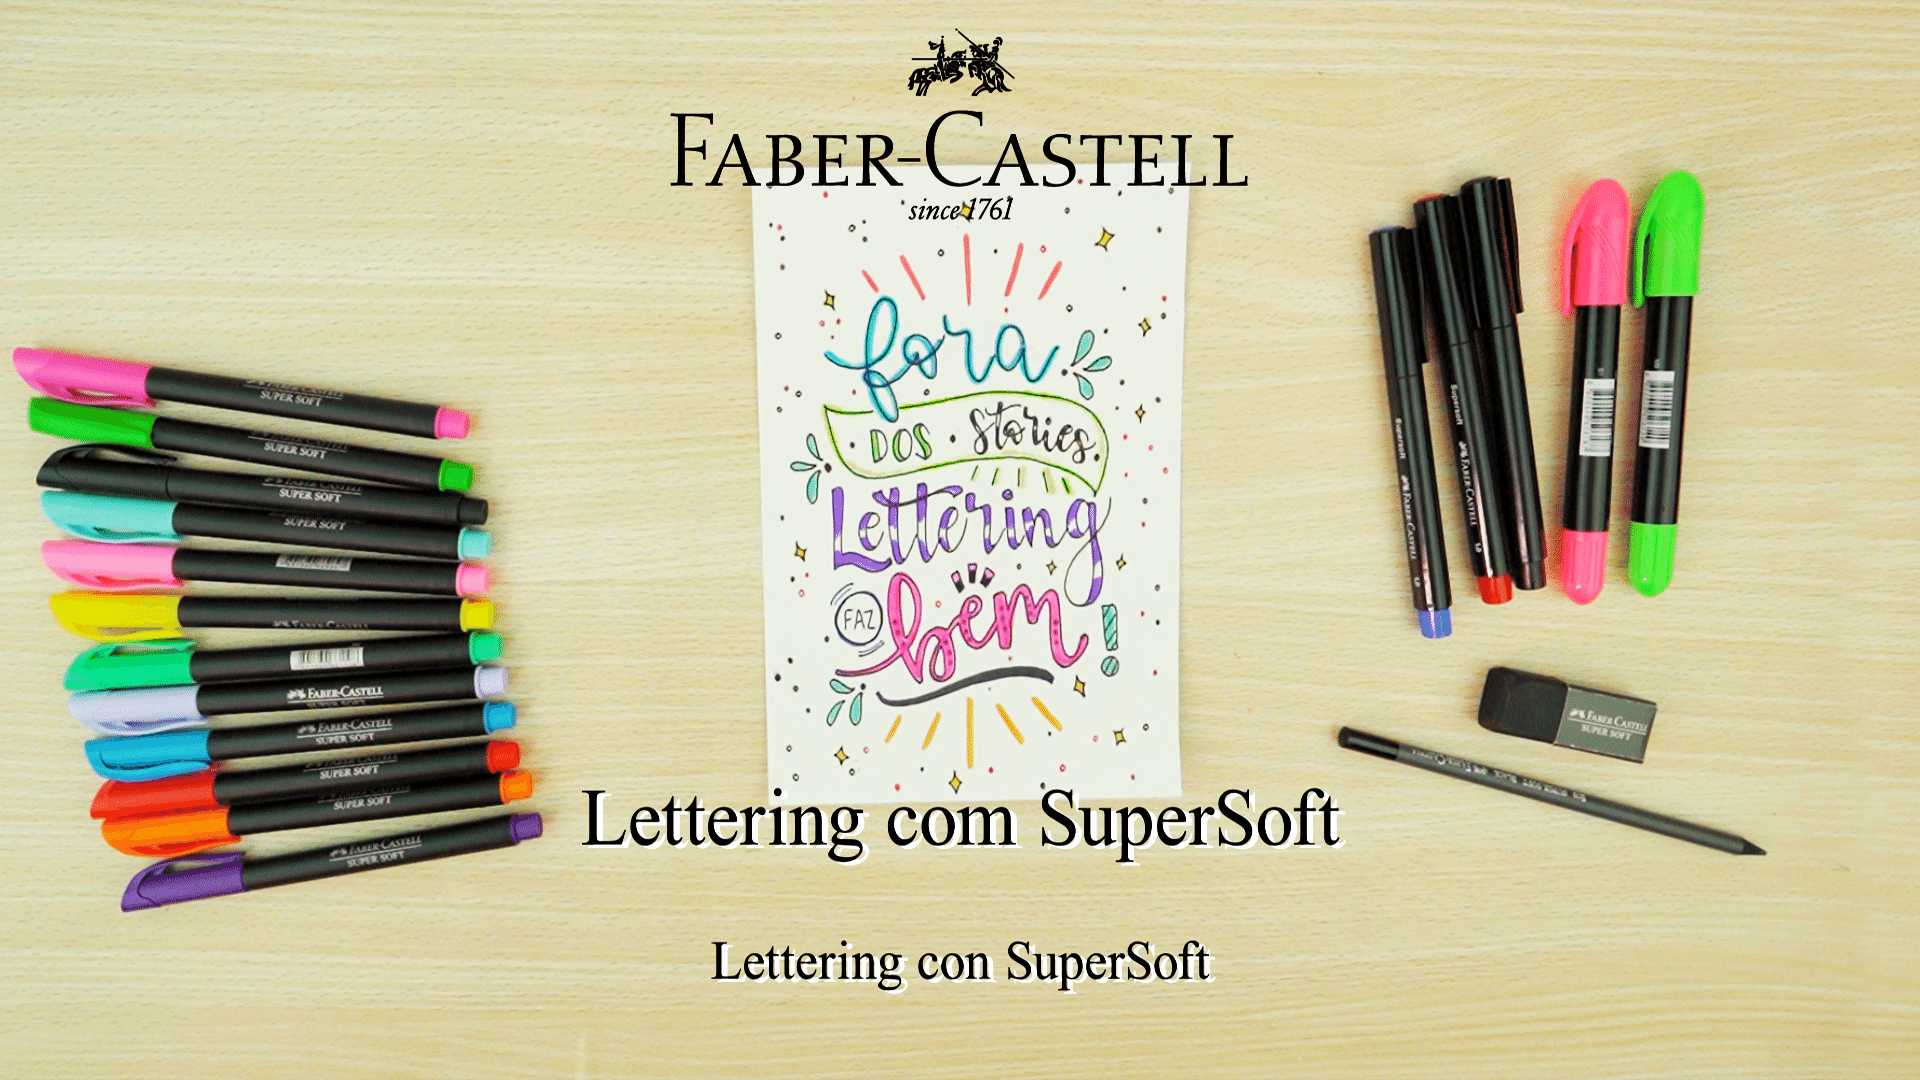 Tutorial Lettering Faber-Castell SuperSoft